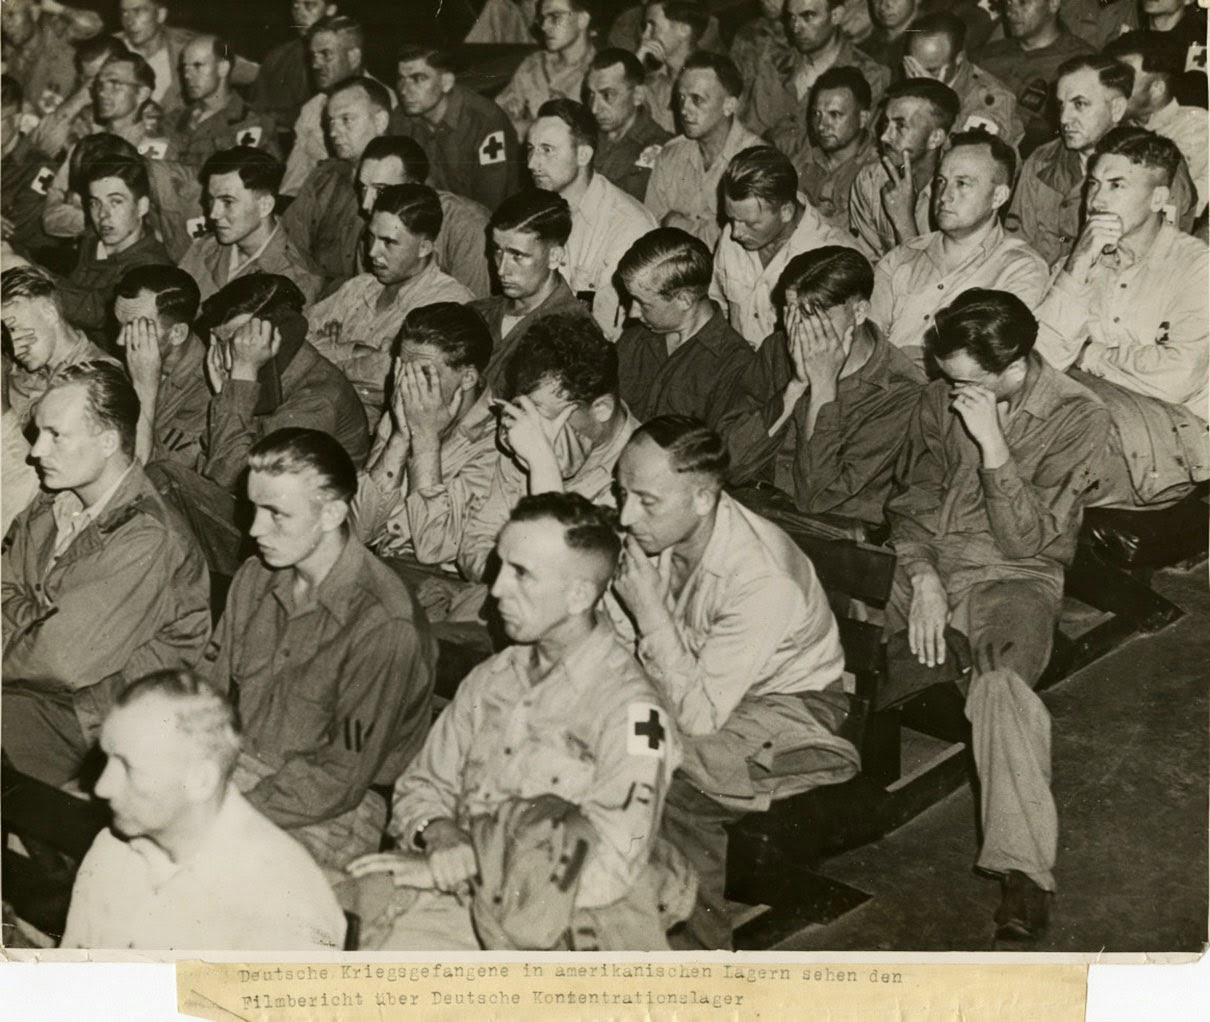 German prisoners of war react to watching film footage from concentration camps, 1945.